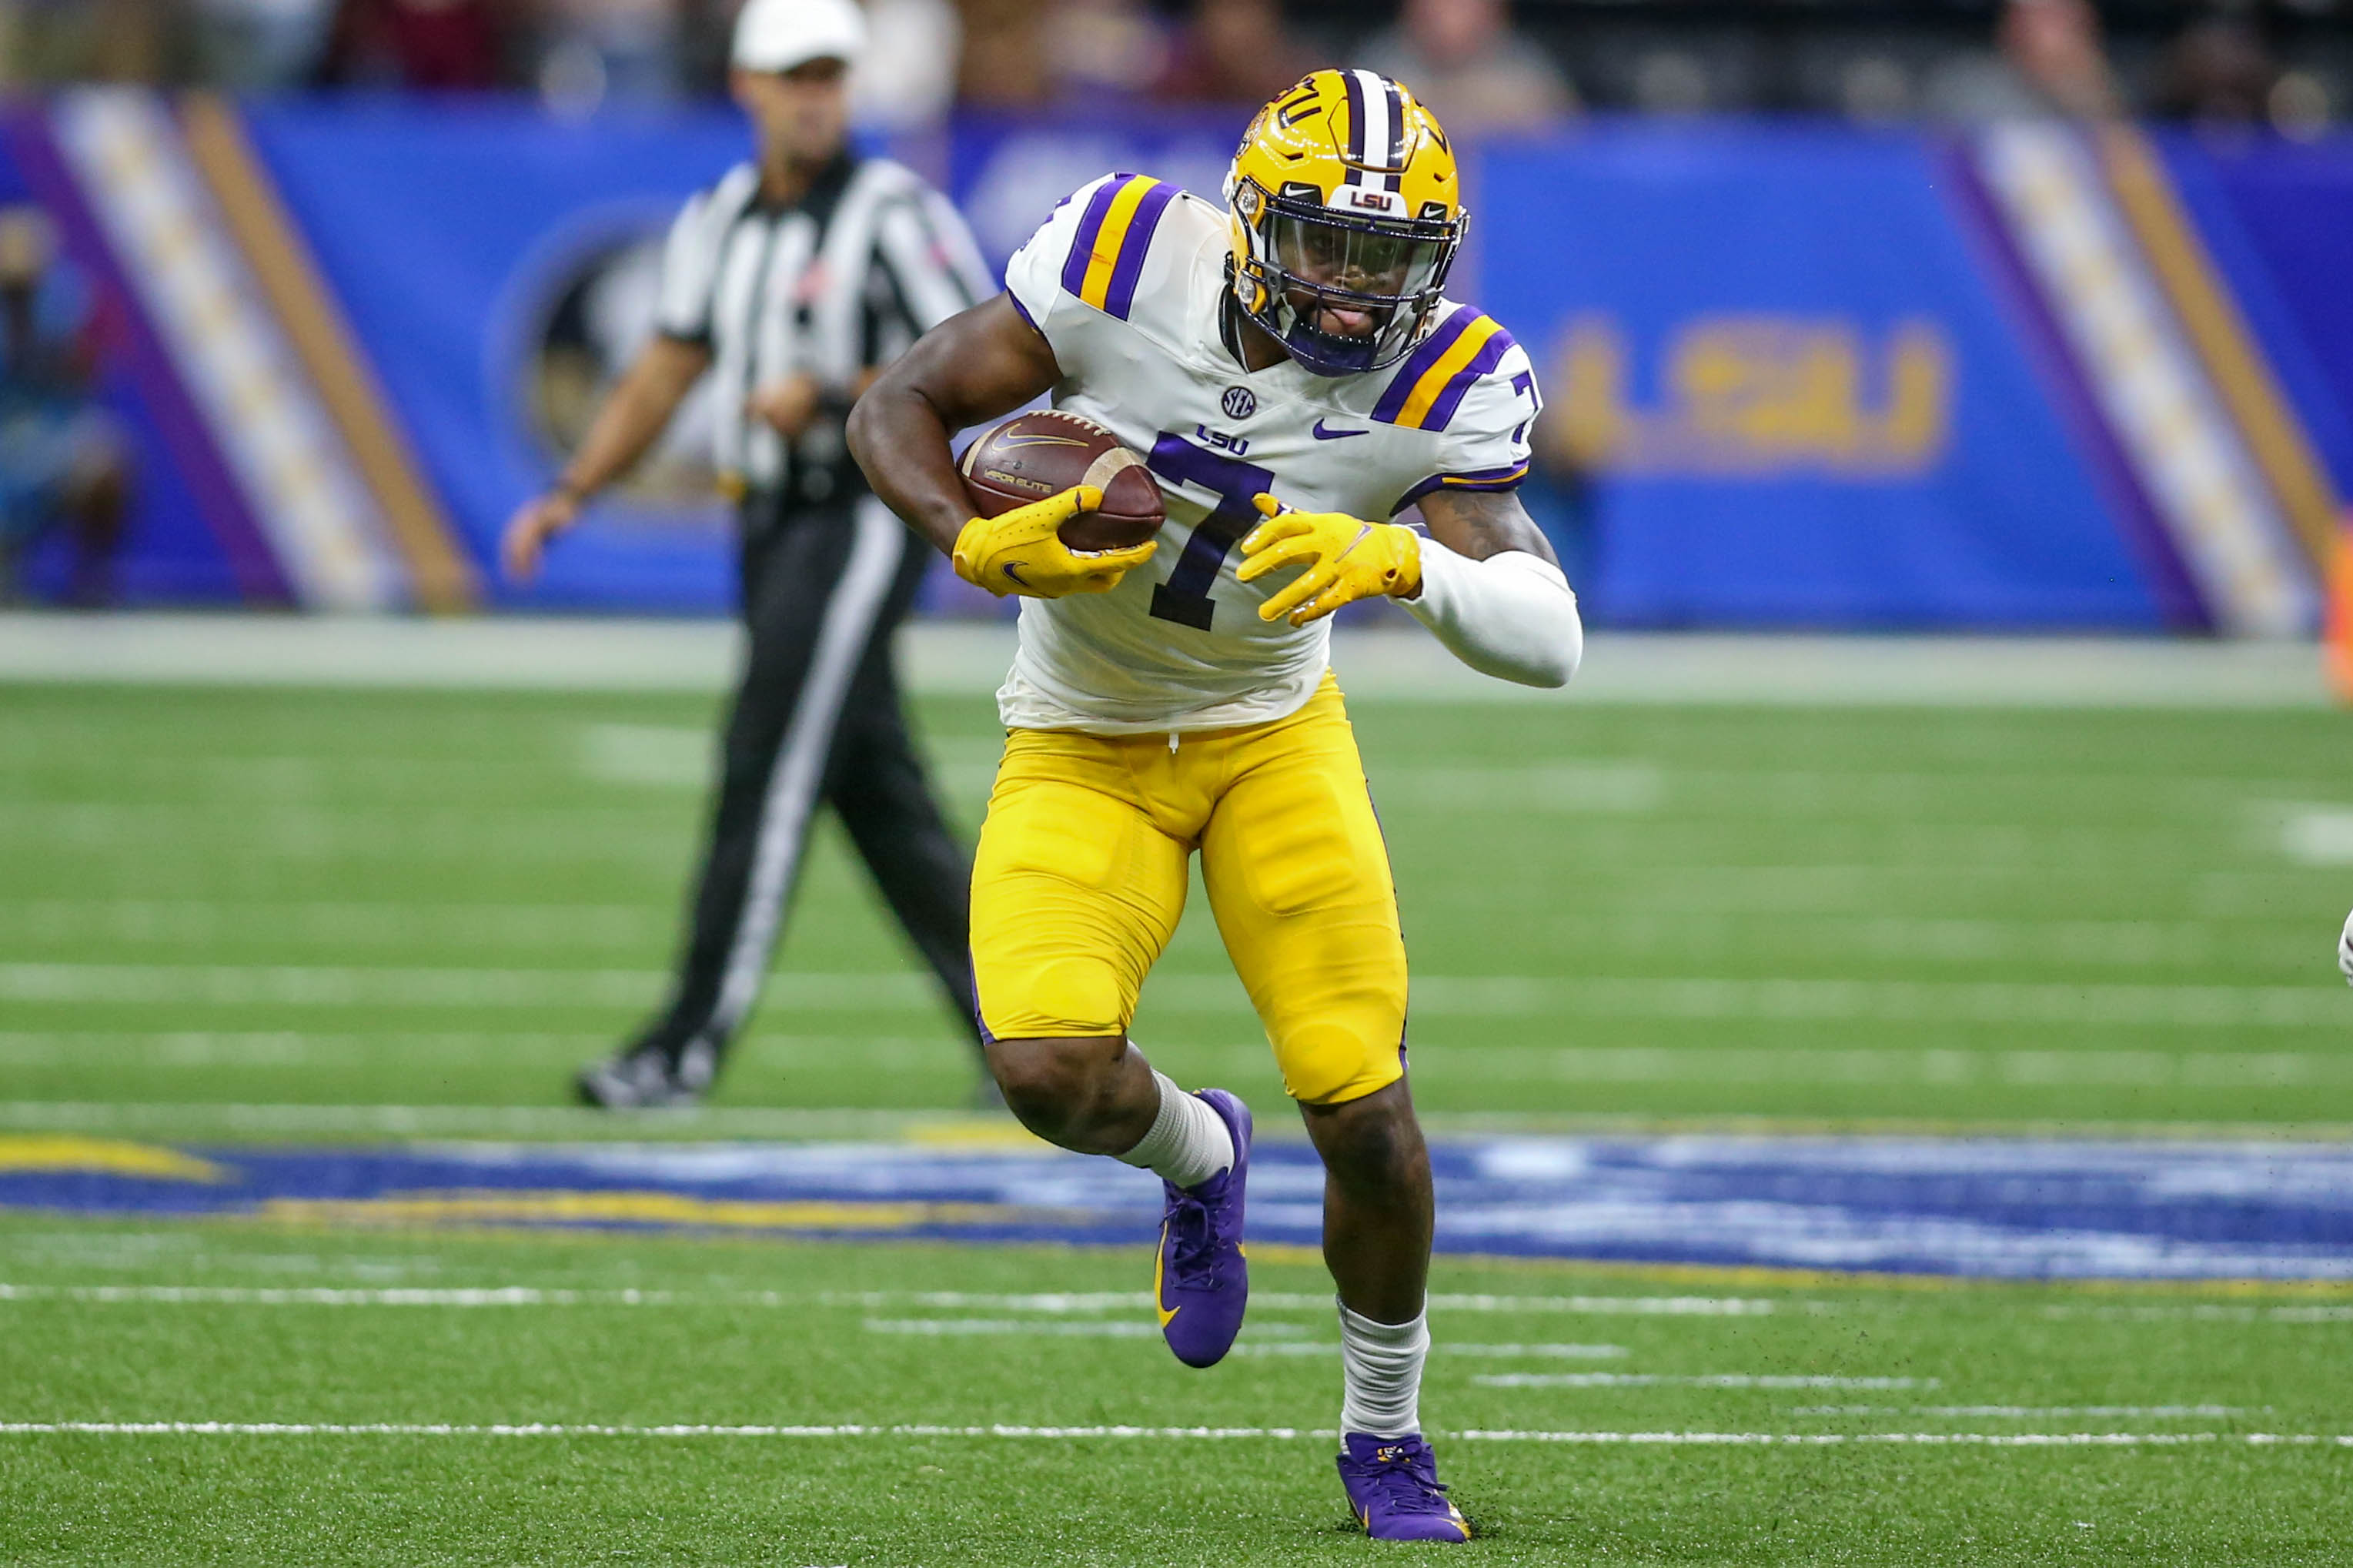 LSU's Kayshon Boutte excused for Saturday's game with New Mexico 